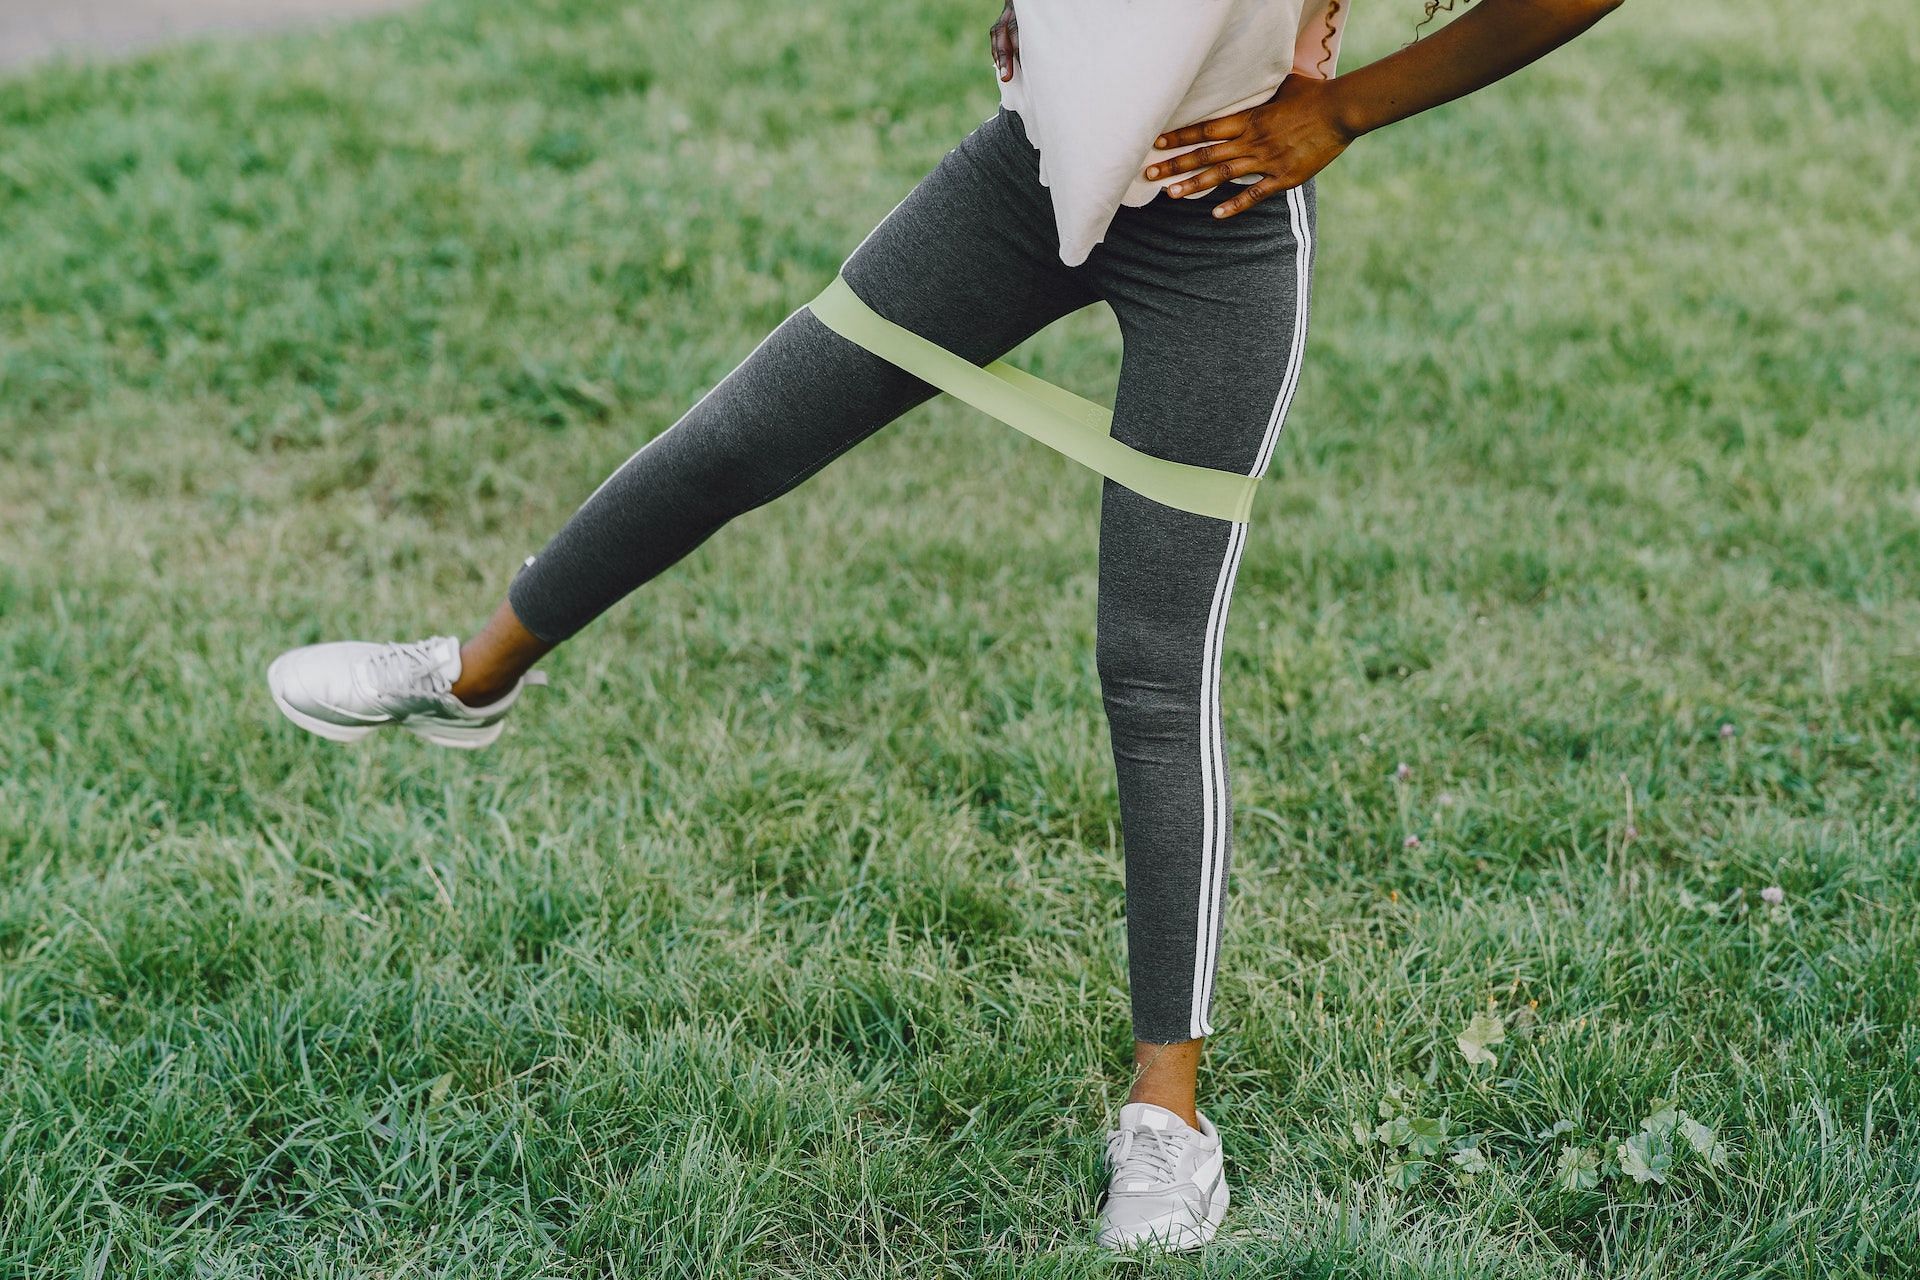 Resistance bands are stretchable, available in different thicknesses and lengths. (Photo via Pexels/Gustavo Fring)